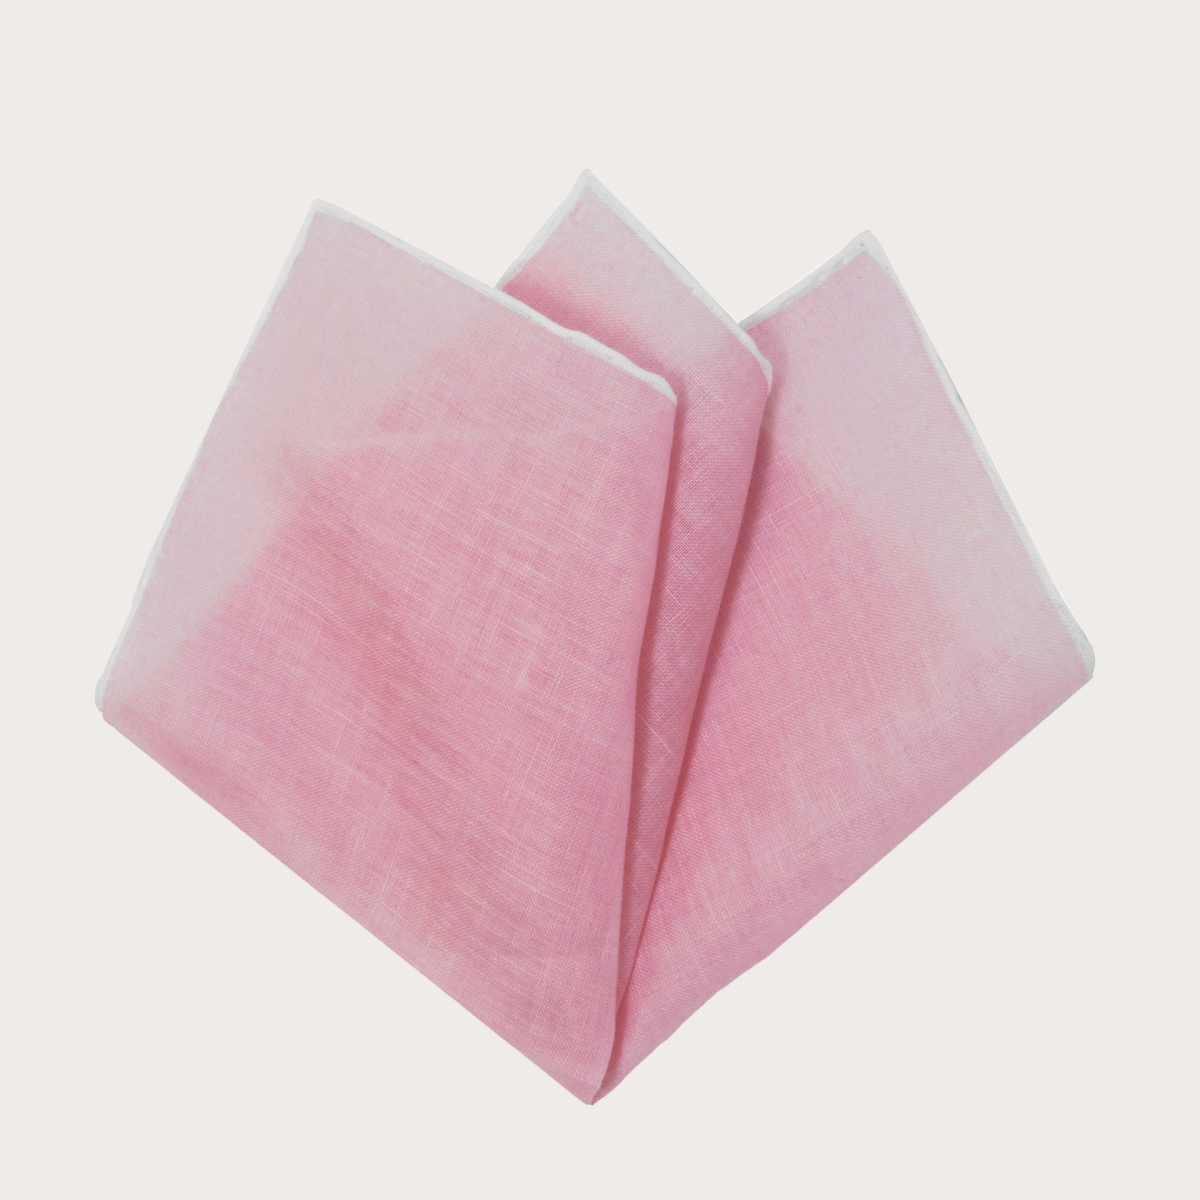 BRUCLE Pocket square in linen, pink with white edges